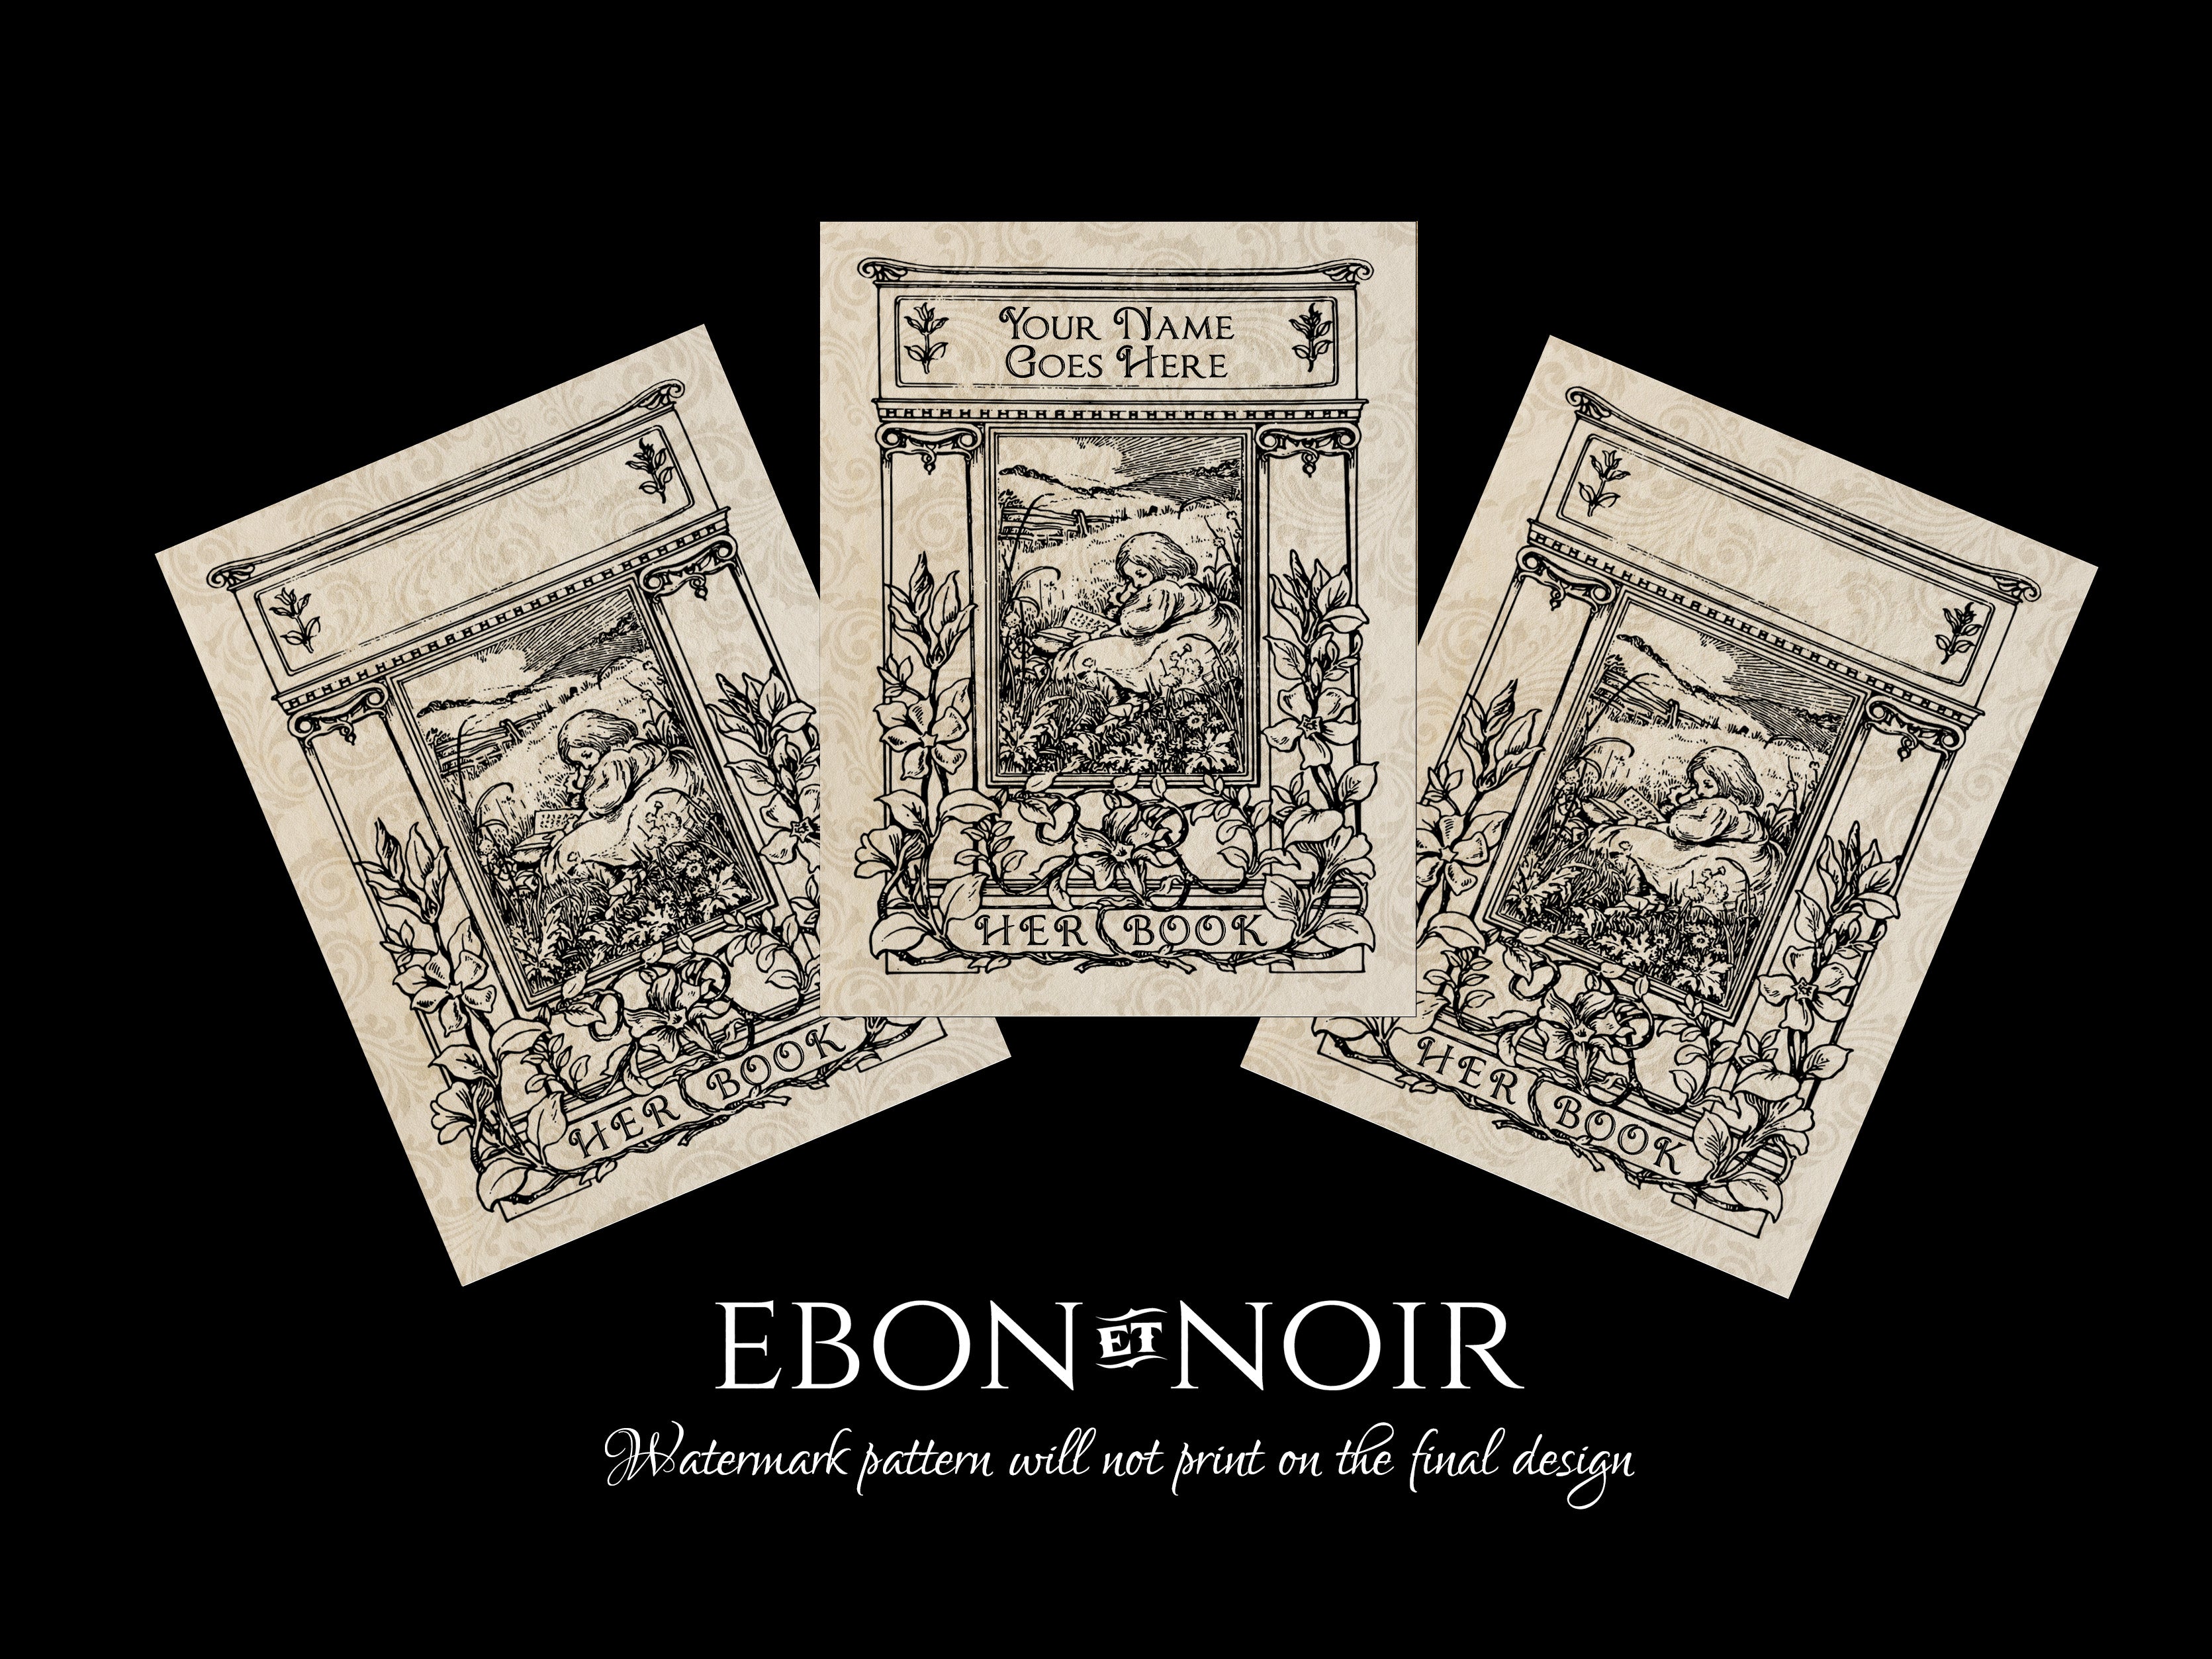 Little Girl Reading, Personalized Ex-Libris Bookplates, Crafted on Traditional Gummed Paper, 3in x 4in, Set of 30